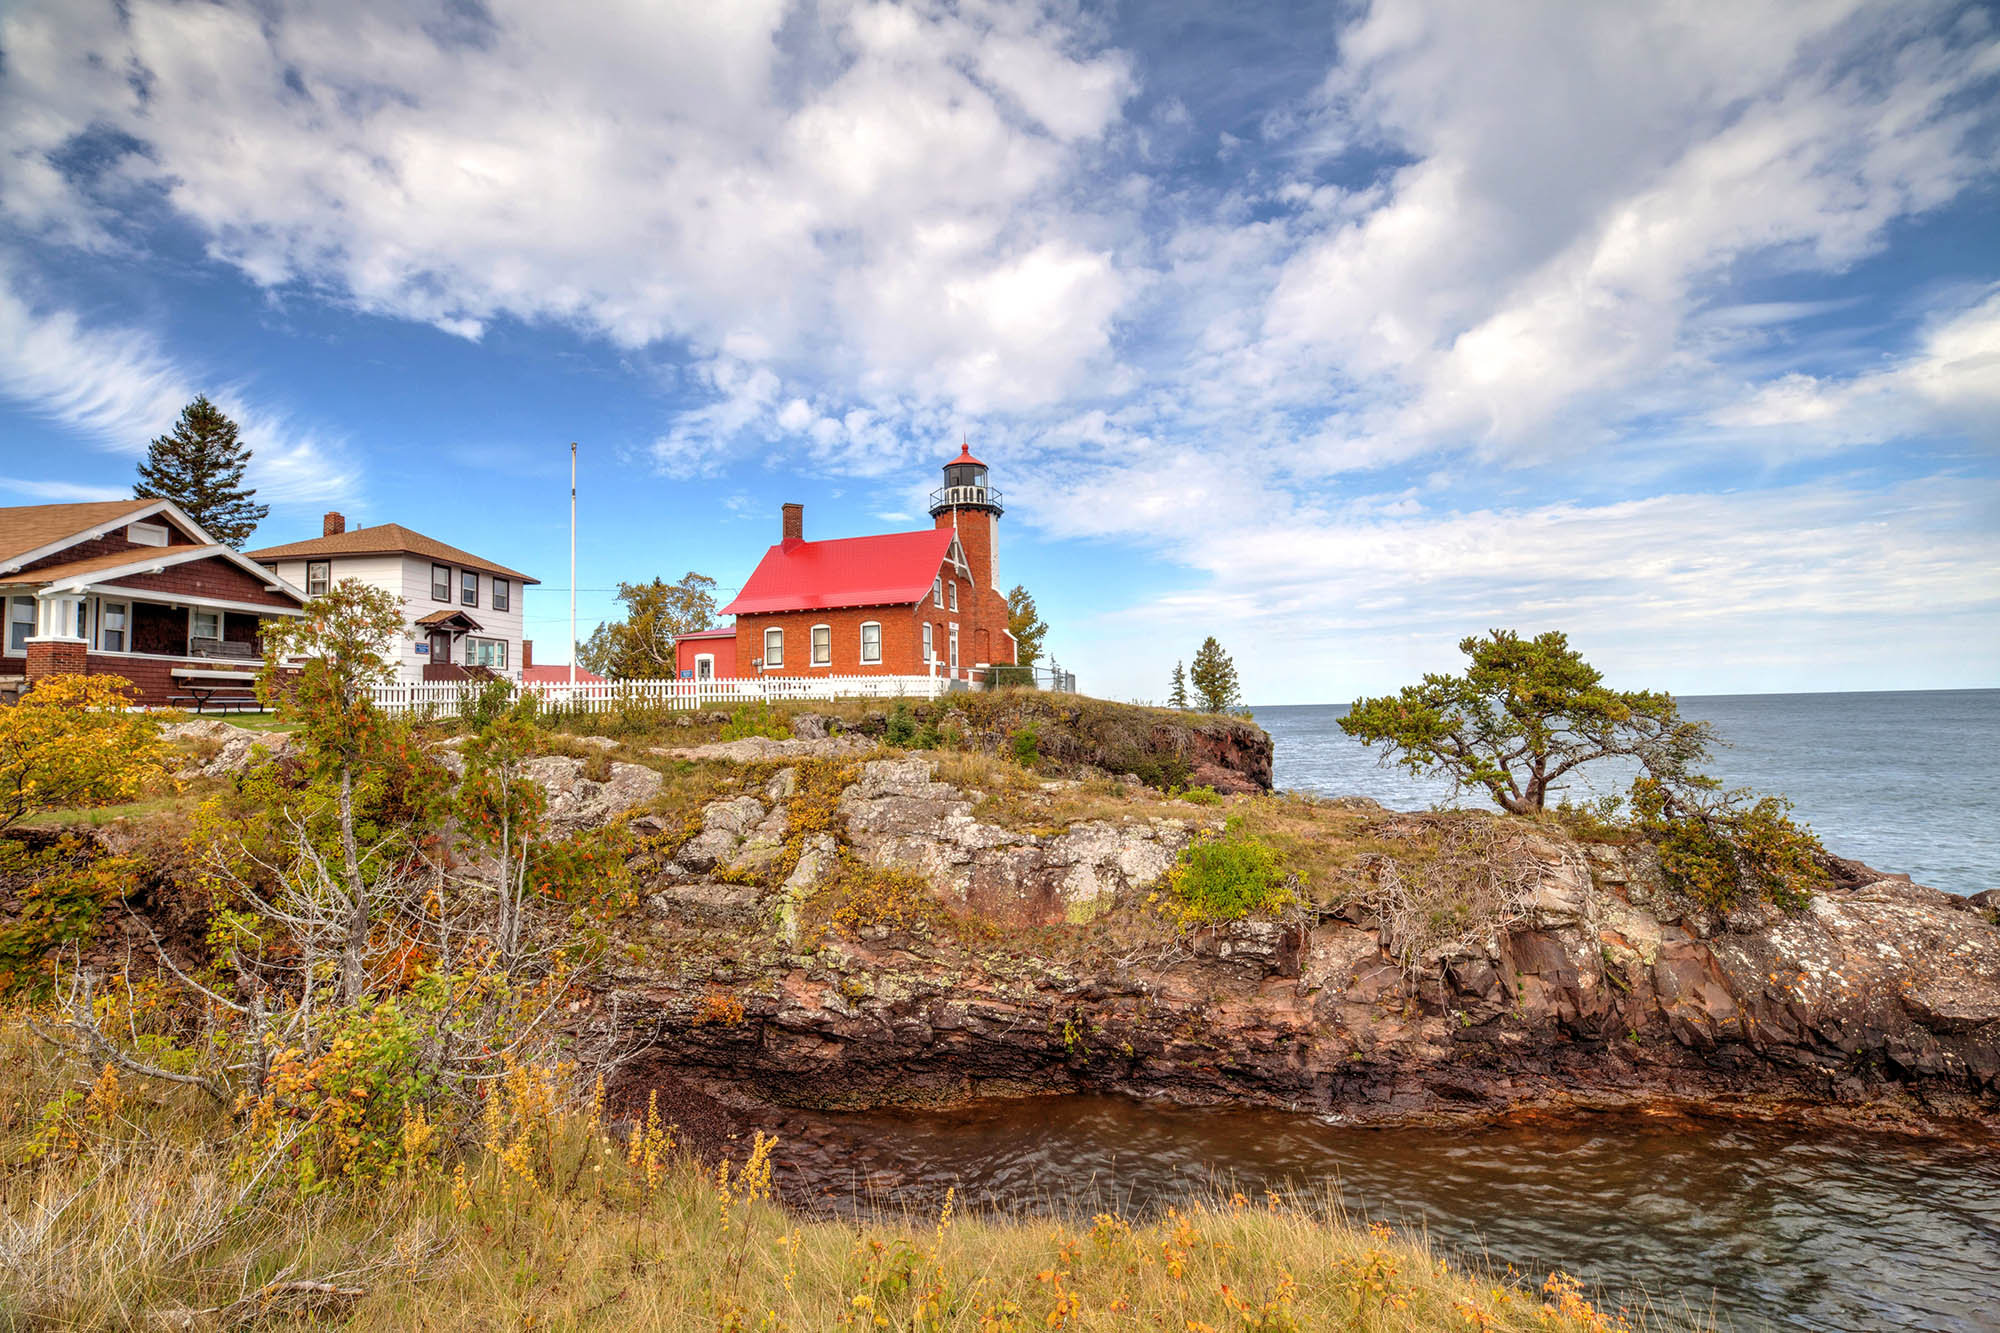 The Best Lighthouses to Visit in the Fall